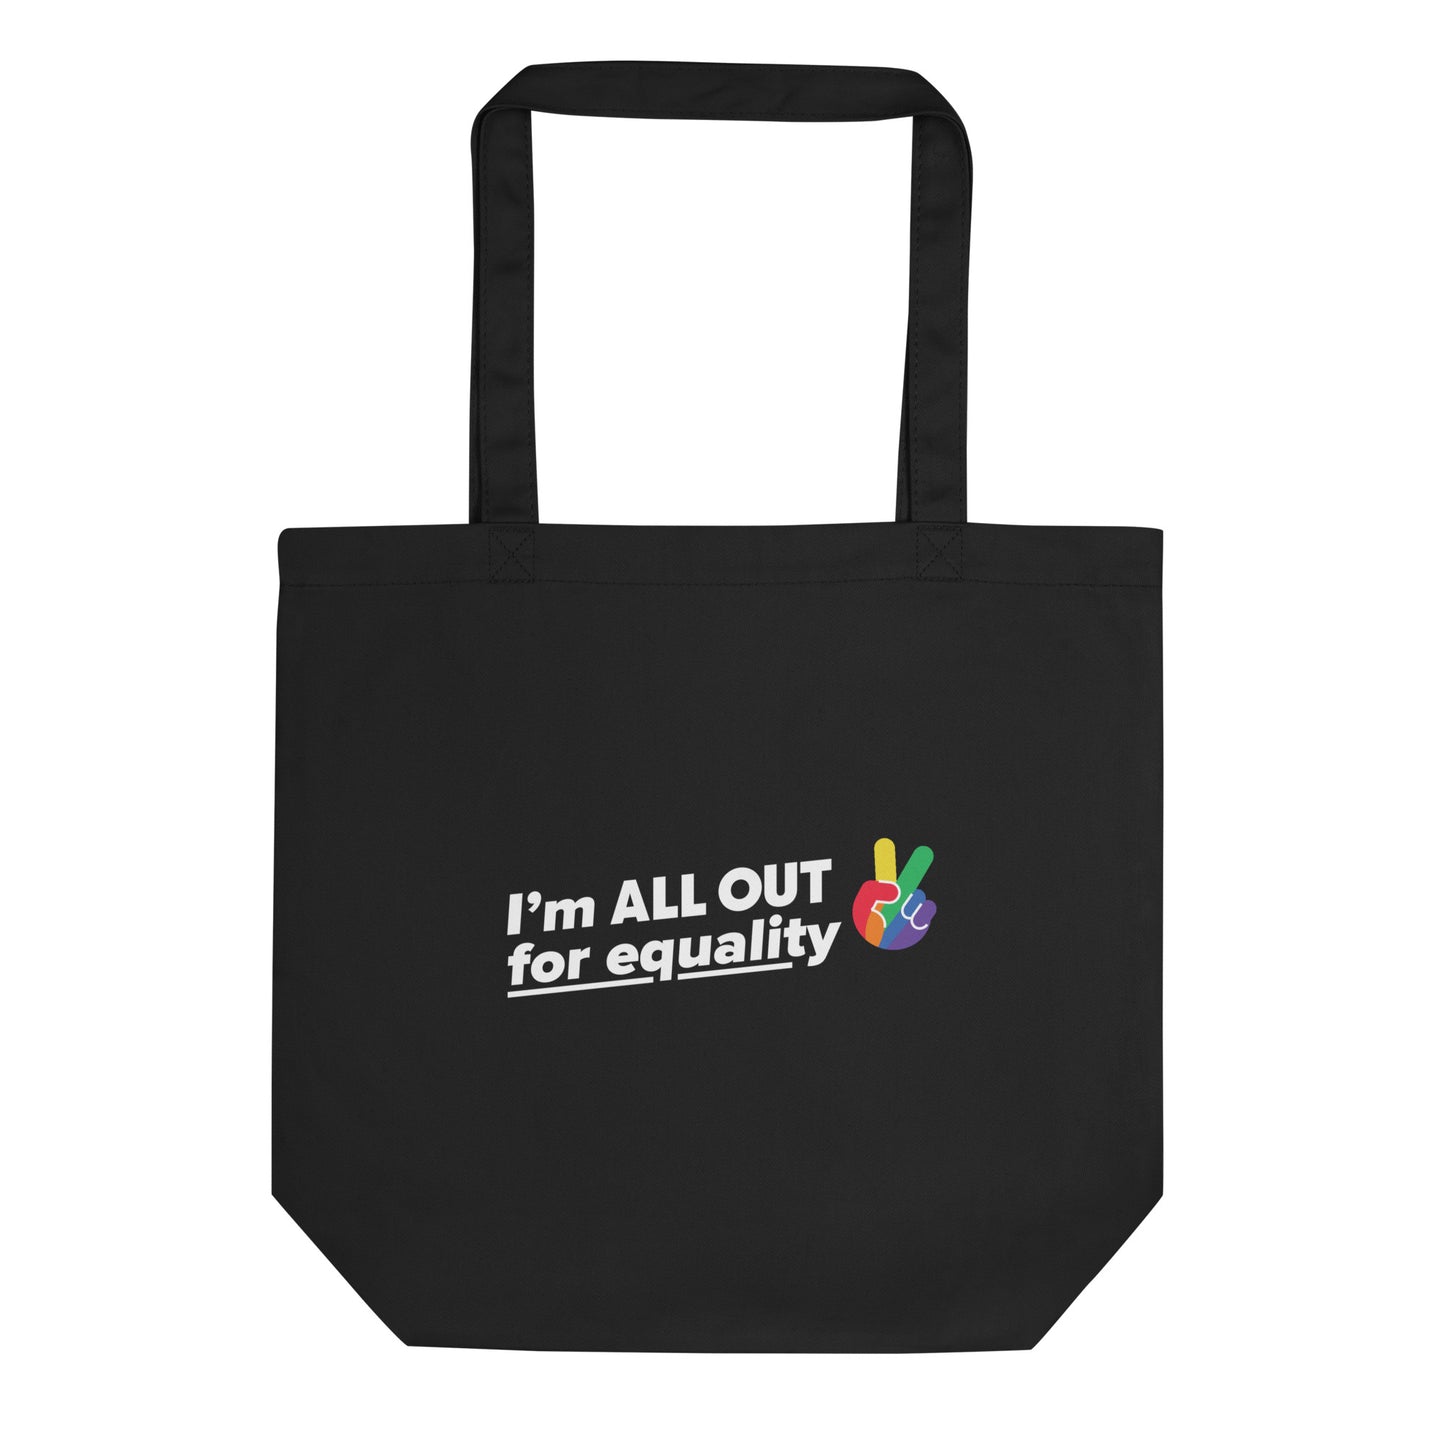 I'm All Out for Equality - Tote Bag